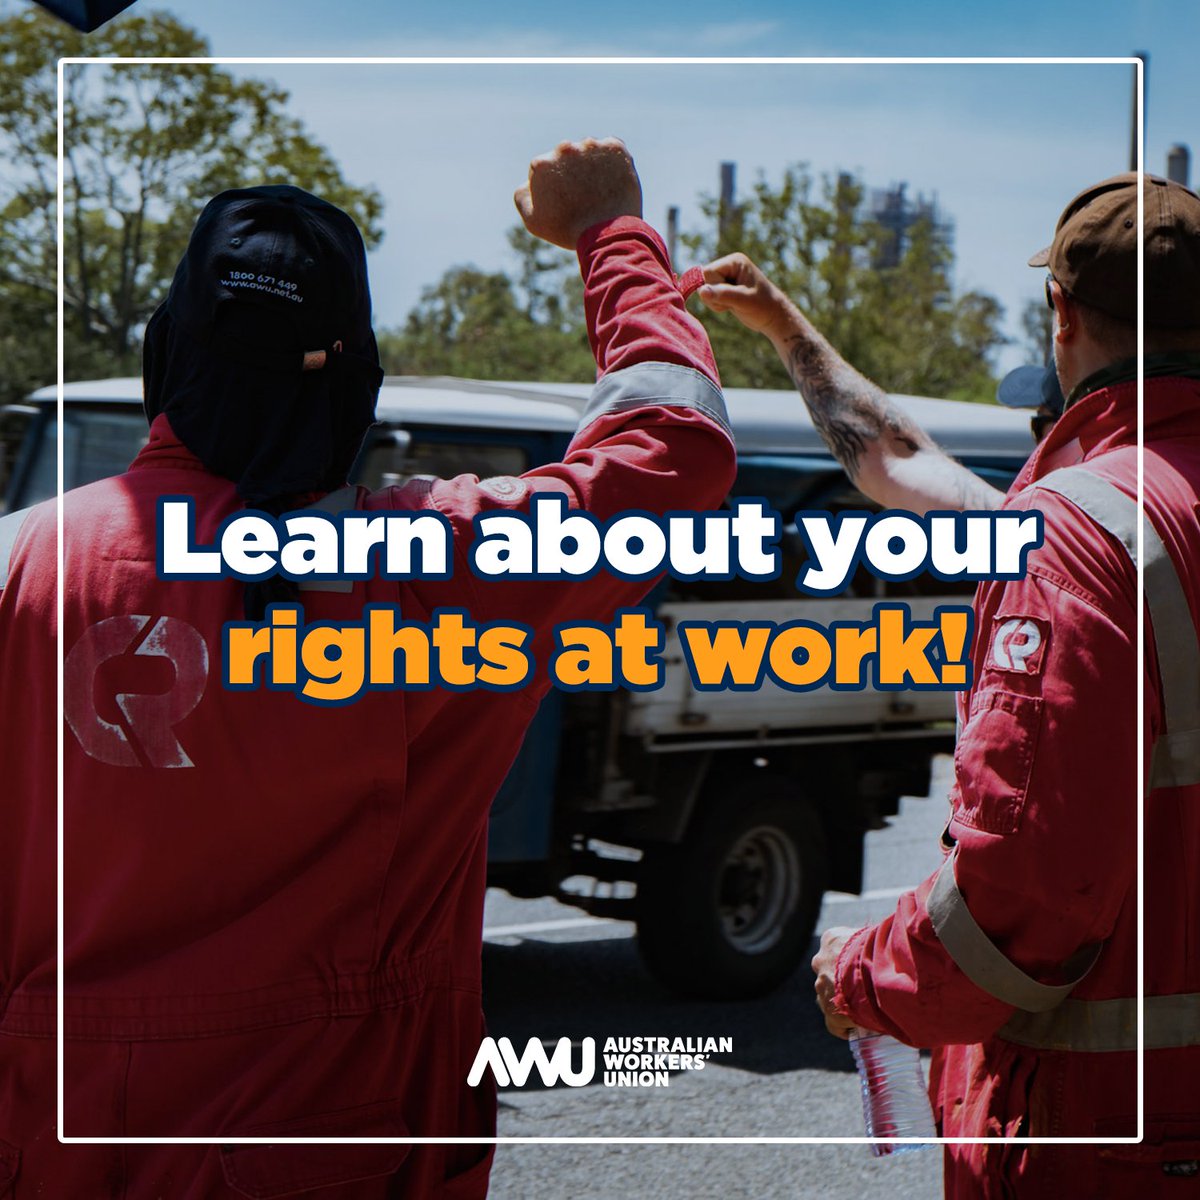 Are you up to date on your rights at work? And do you know what to do if something isn't right? From Annual Leave to the working week, we've compiled all the information that you need to know on our website. Click here to check it out and get informed! go.awu.net.au/Your-Rights